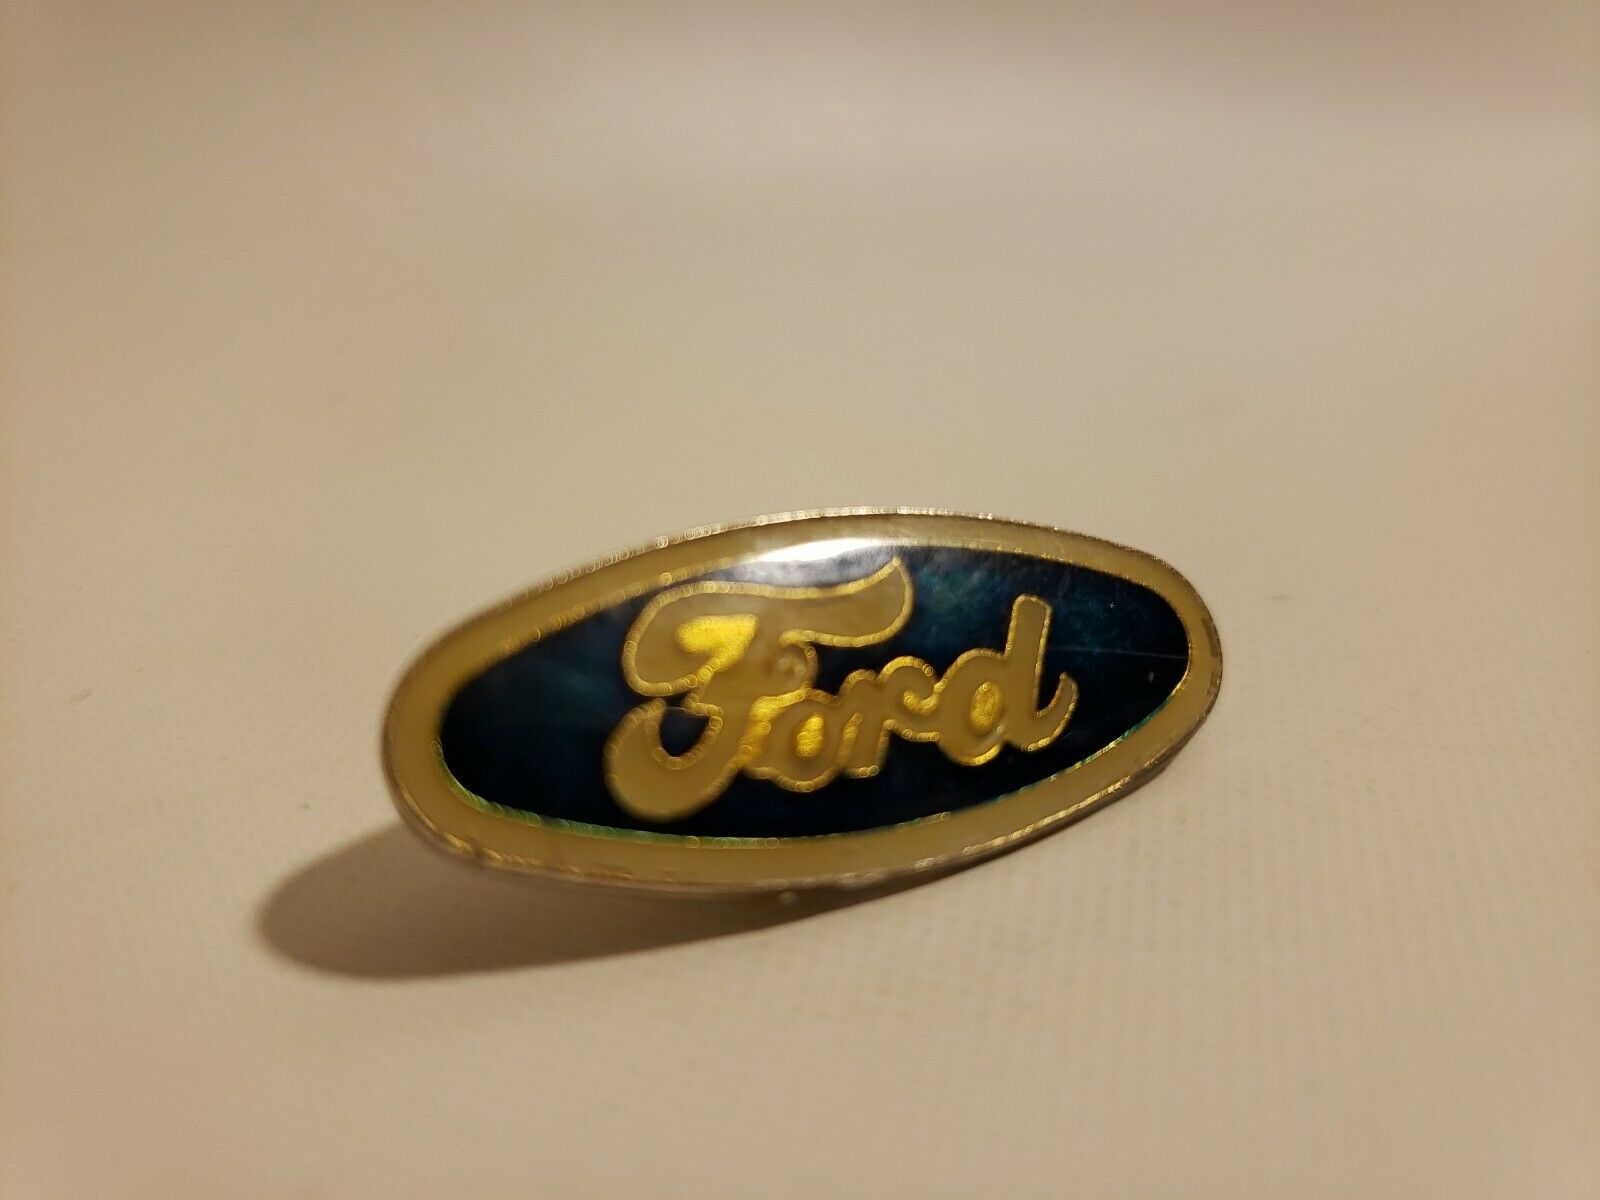 Ford Lapel Hat Tie Pin Turquoise Color Inlay Background Jewelry Costume